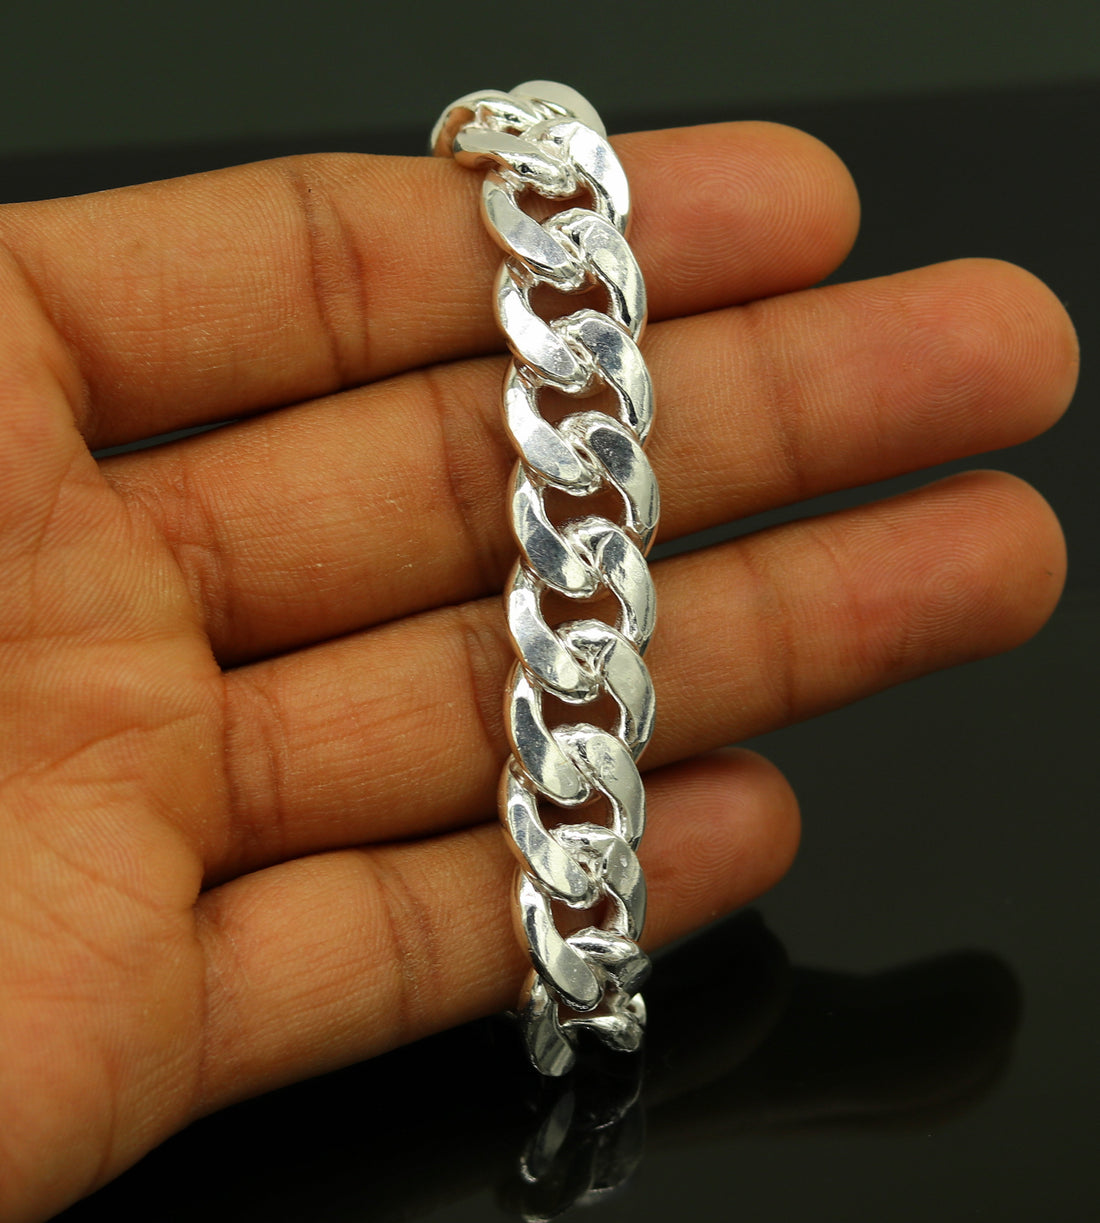 9" inches long Handmade solid silver customized heavy design unisex bracelet, gorgeous personalized gifting chain bracelet nsbr153 - TRIBAL ORNAMENTS